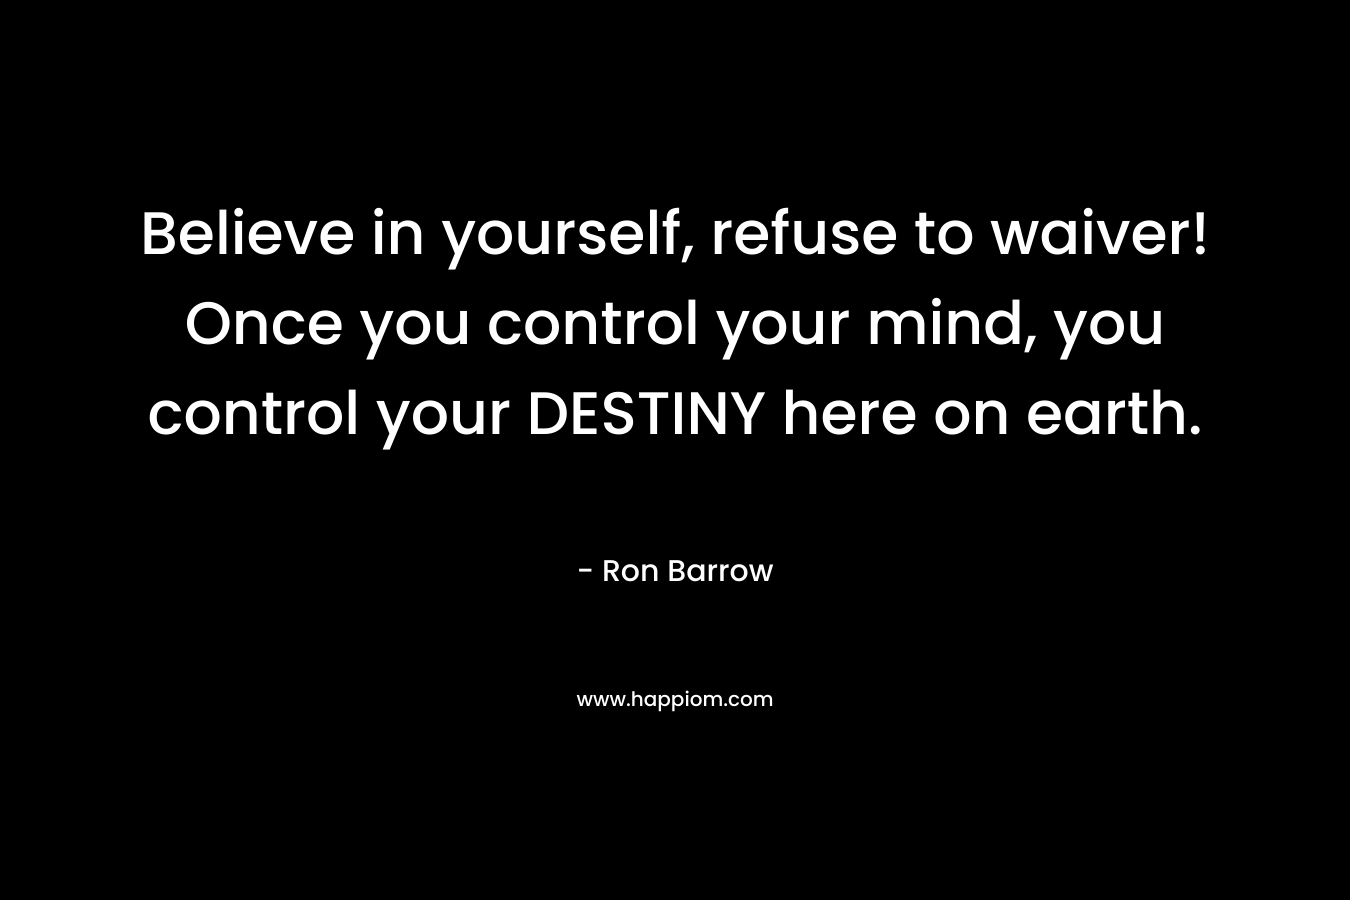 Believe in yourself, refuse to waiver! Once you control your mind, you control your DESTINY here on earth. – Ron Barrow